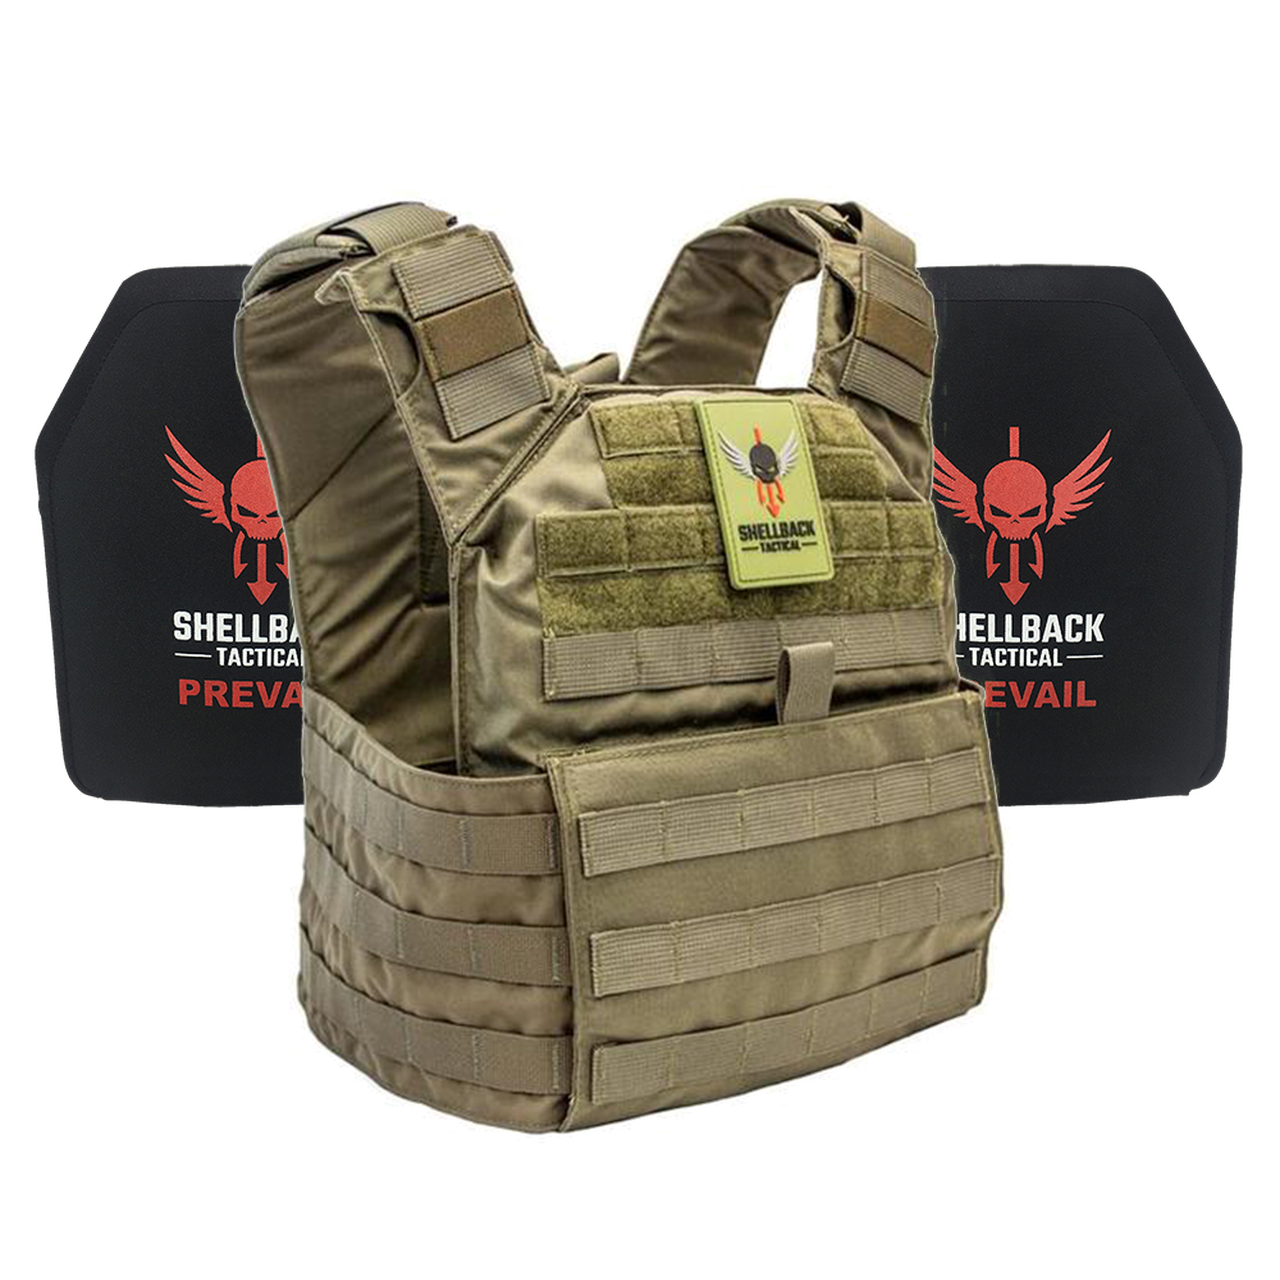 A Shellback Tactical Banshee Active Shooter Kit with Level IV Model 1155 Armor Plates plate carrier with a red and black logo.